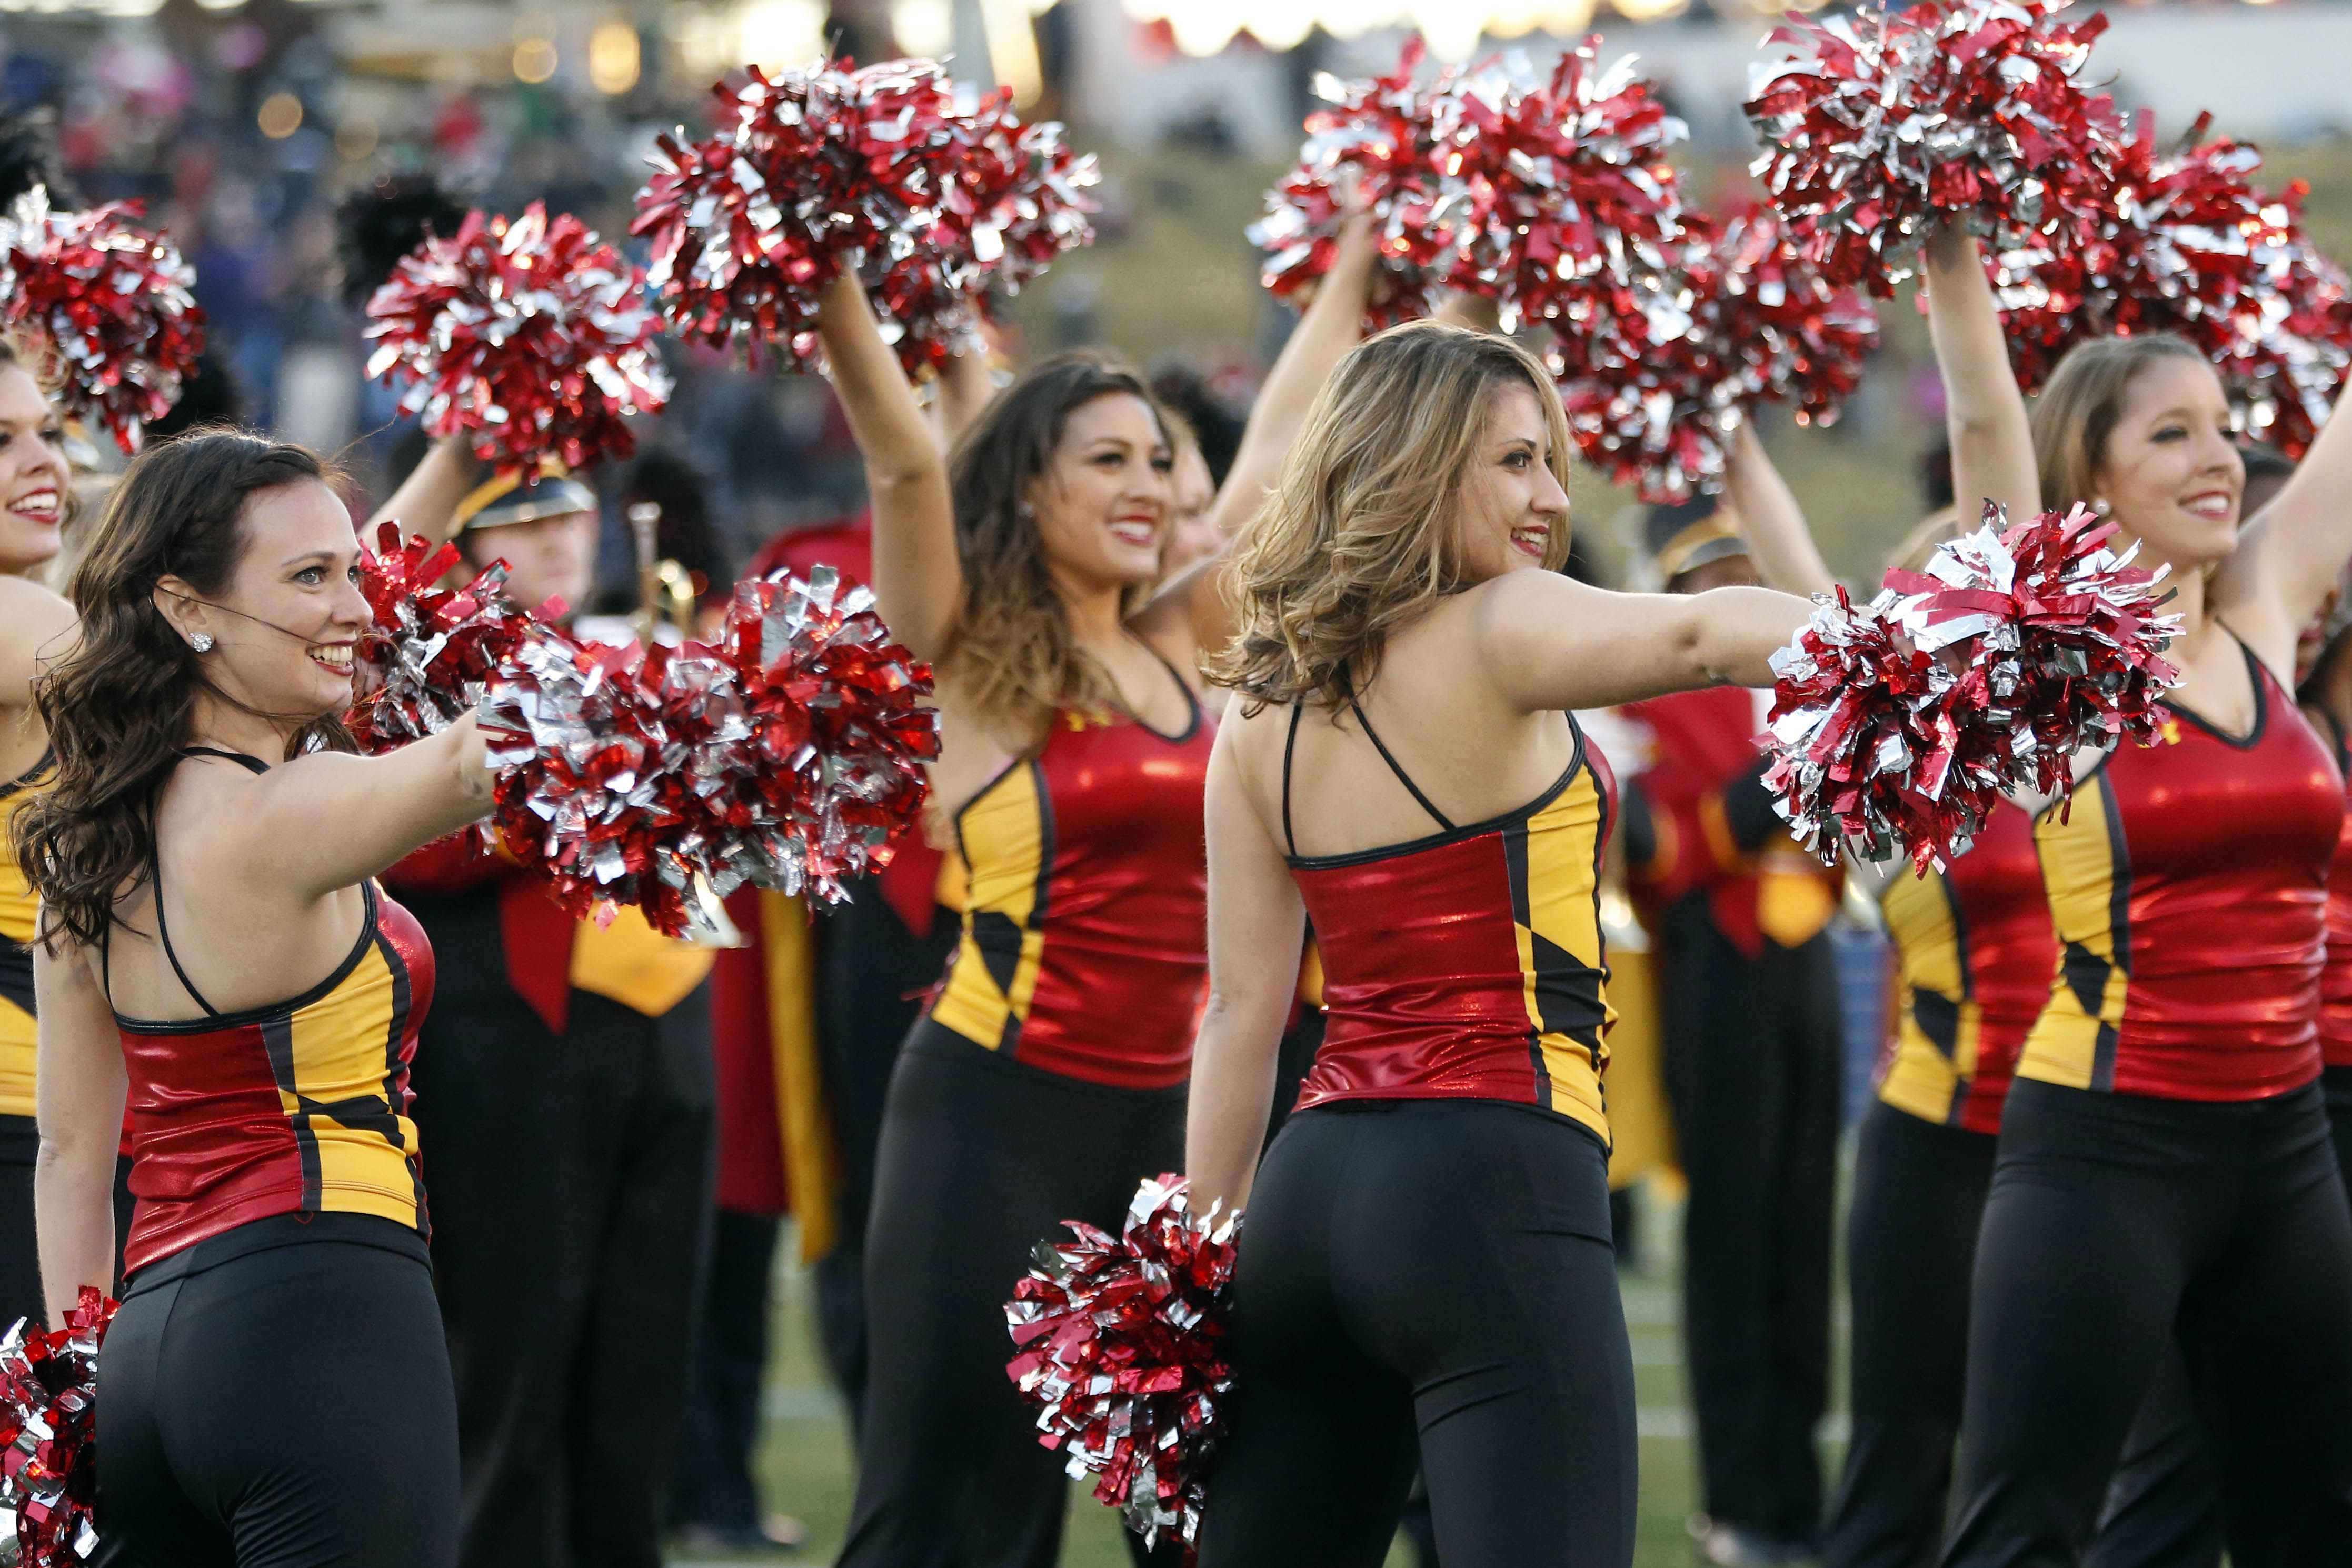 OFFICIAL OPPONENTS HOTTIES THREAD- MARYLAND (They Have Crabs)